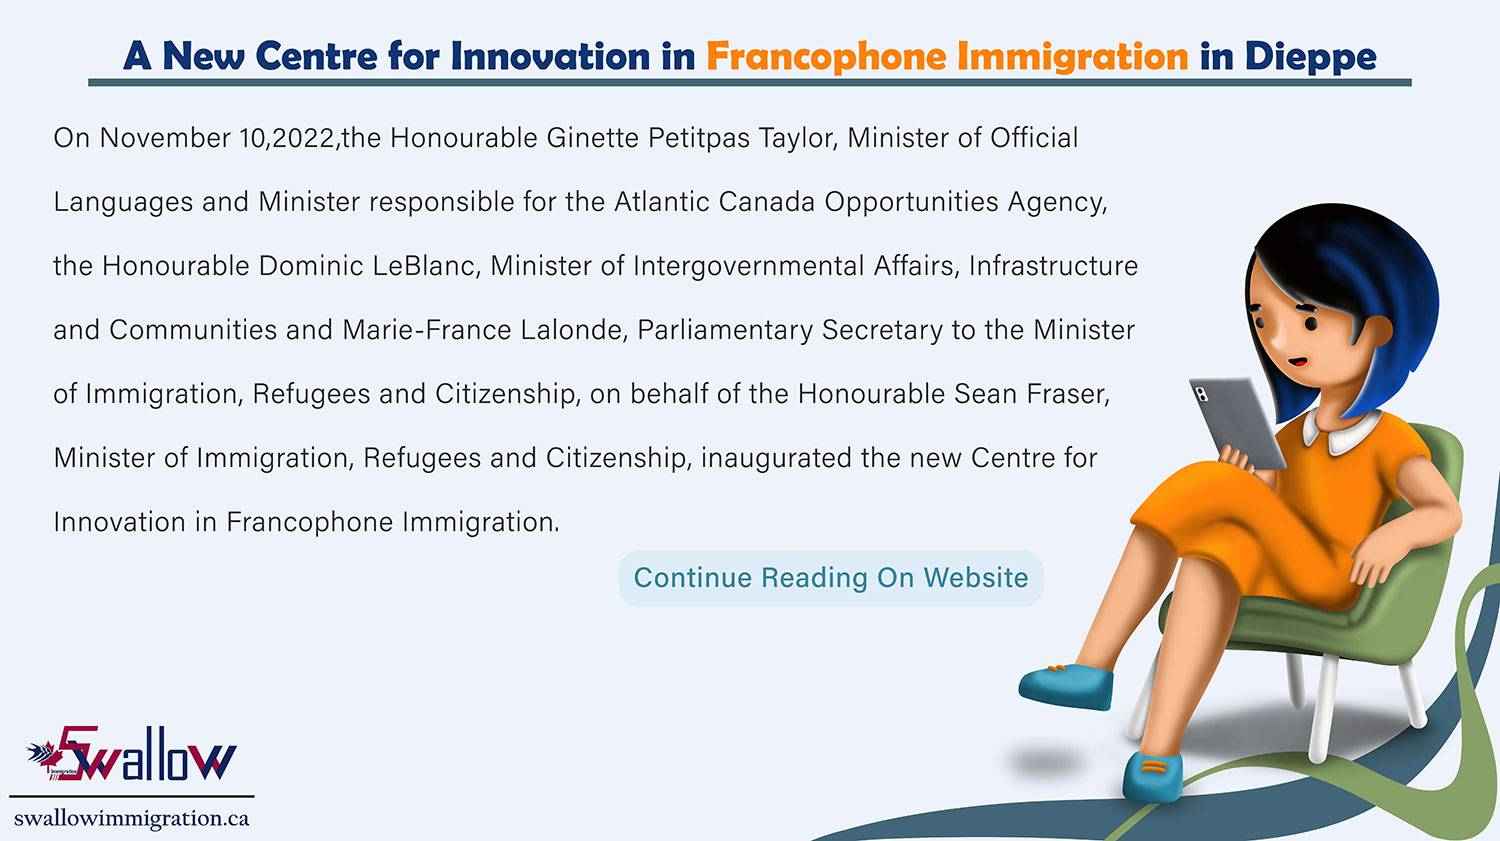 A New Centre for Innovation in Francophone Immigration in Dieppe